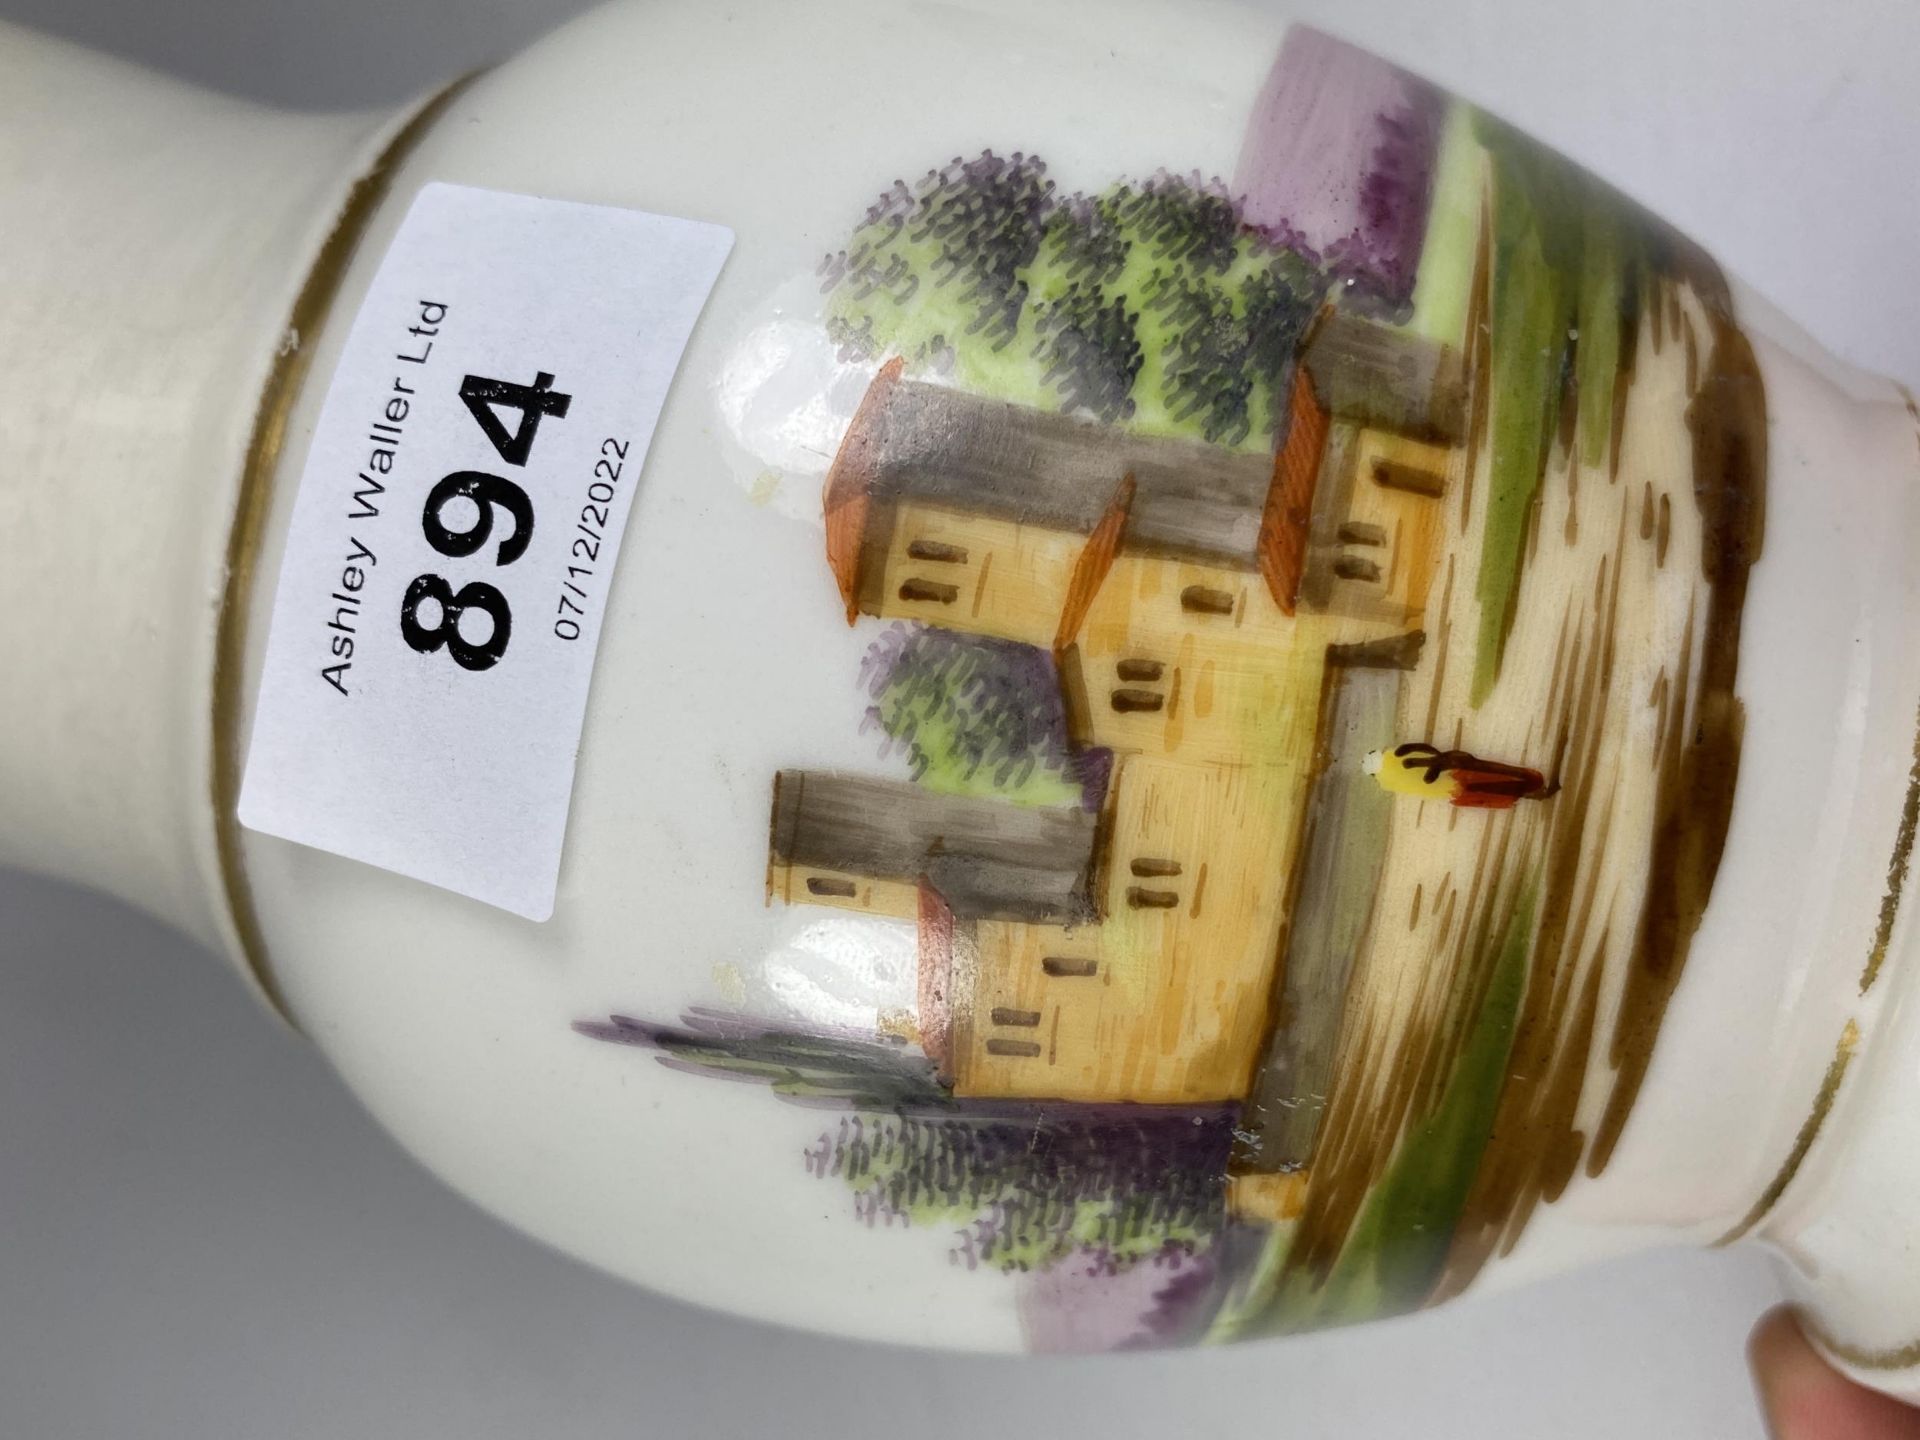 A 19TH CENTURY PORCELAIN JUG WITH HAND PAINTED MANOR HOUSE DESIGN - Image 4 of 4